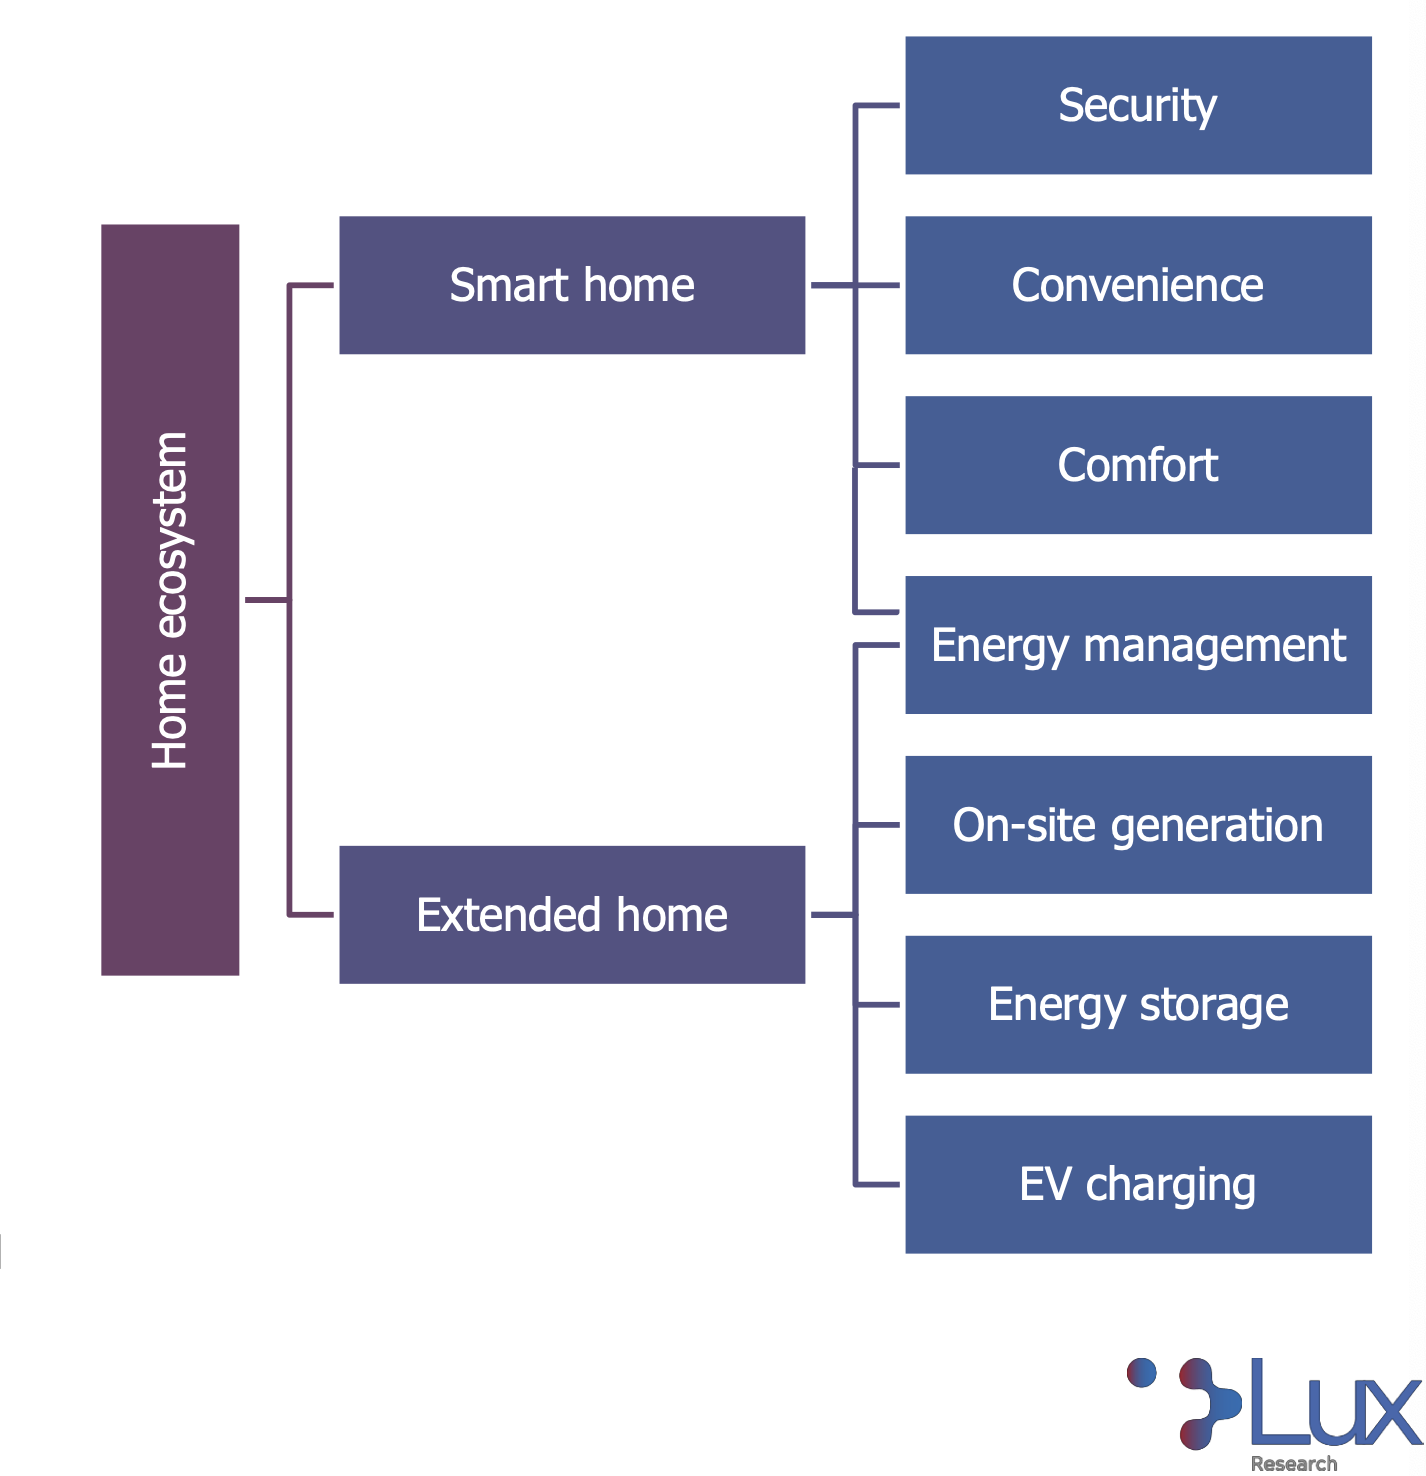 Over $5 billion in investments focused on smart home energy management system